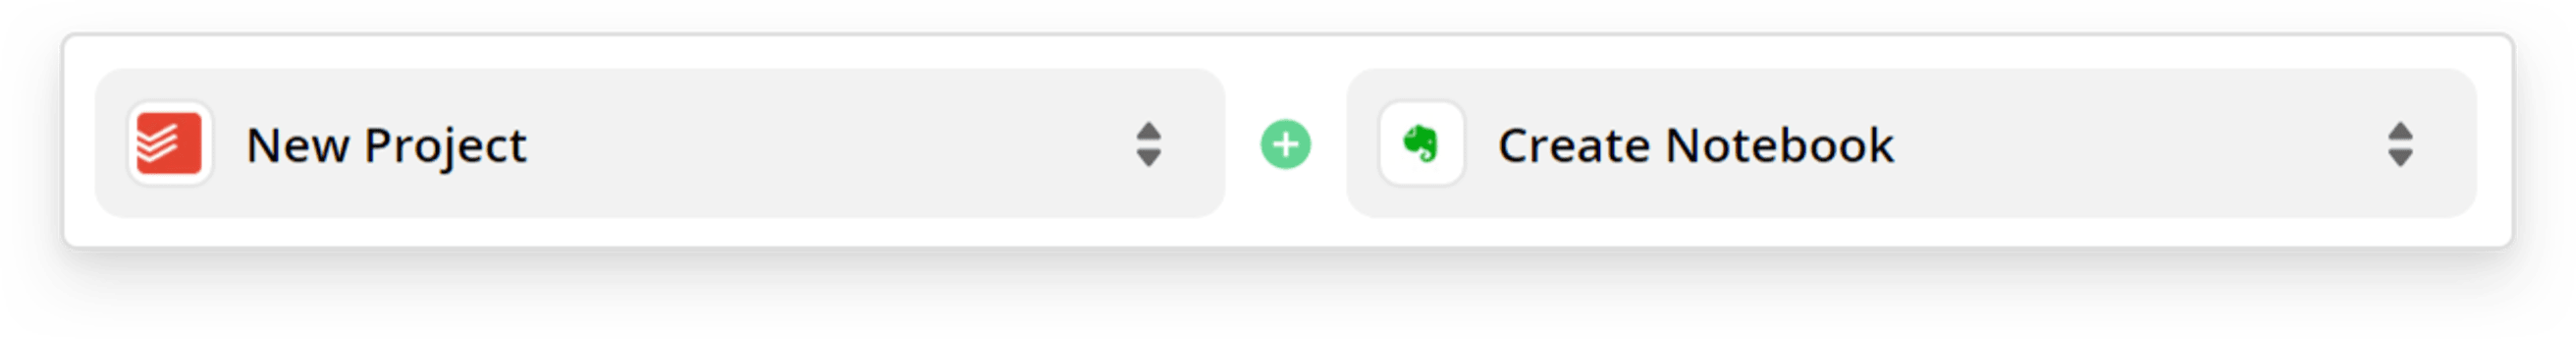 Create a new Evernote notebook from a new Todoist project